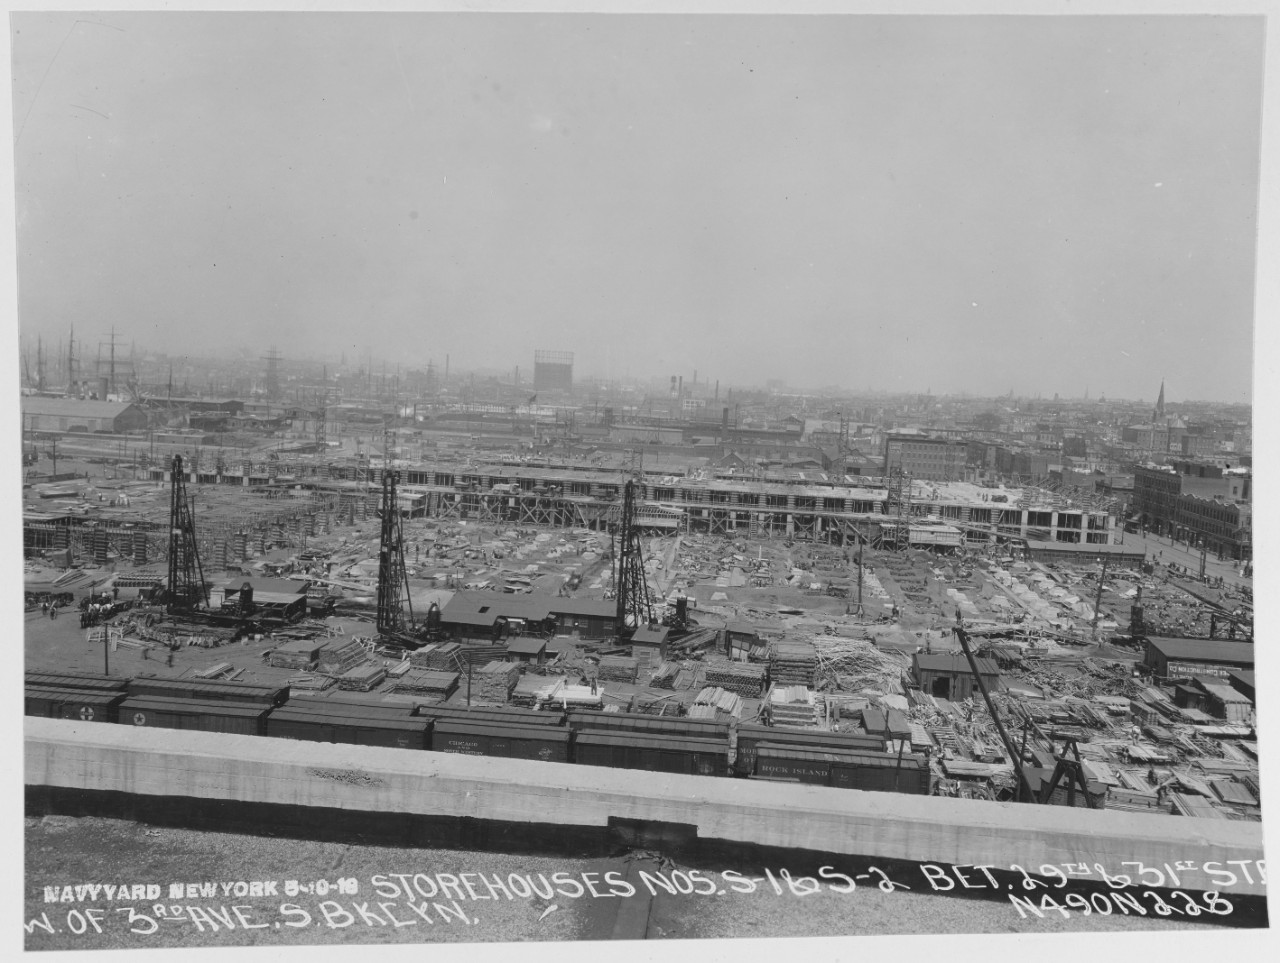 Storehouses S-1 and S-2  S. Brooklyn Navy Yard - New York